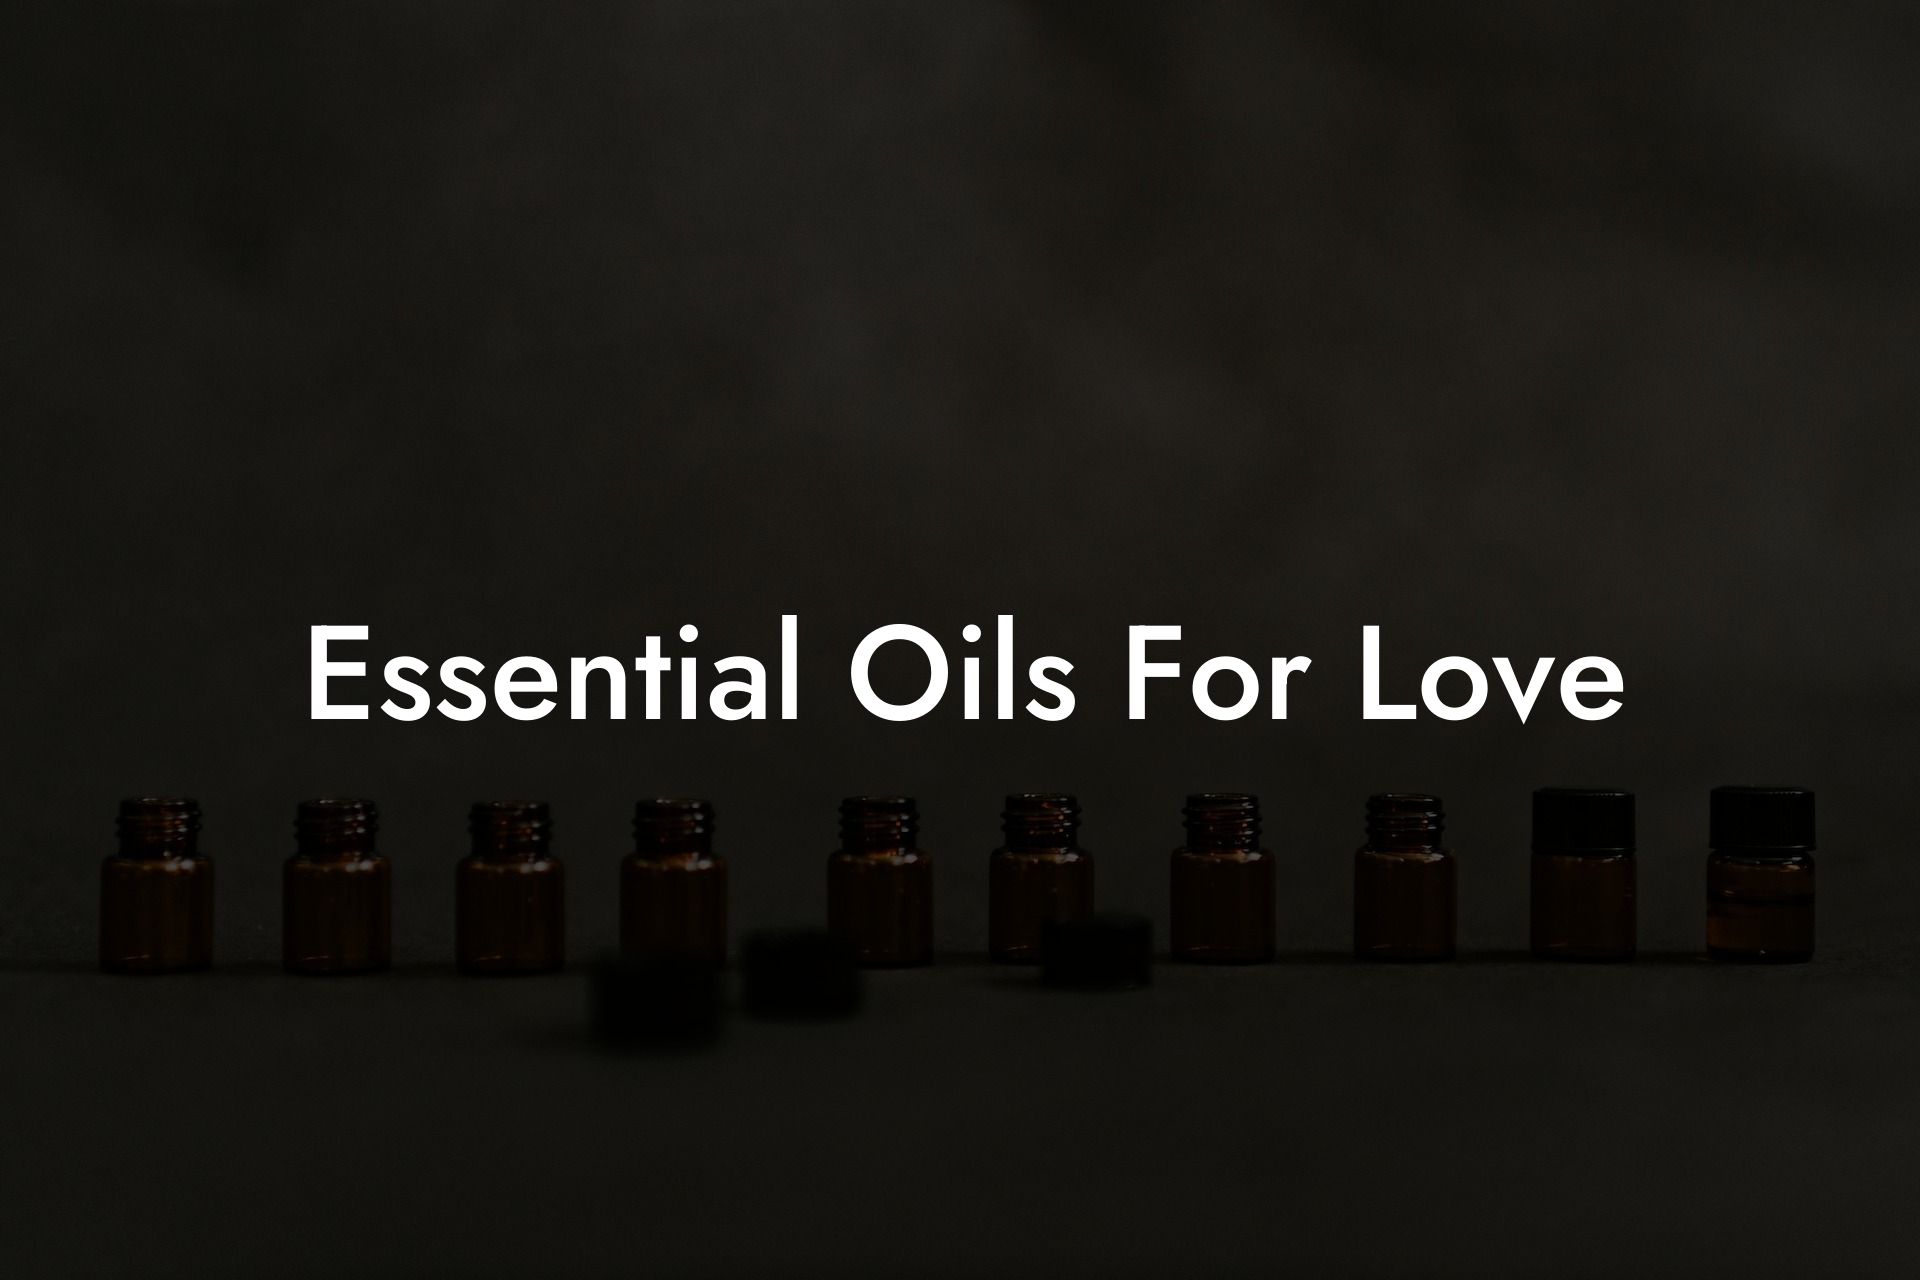 Essential Oils For Love